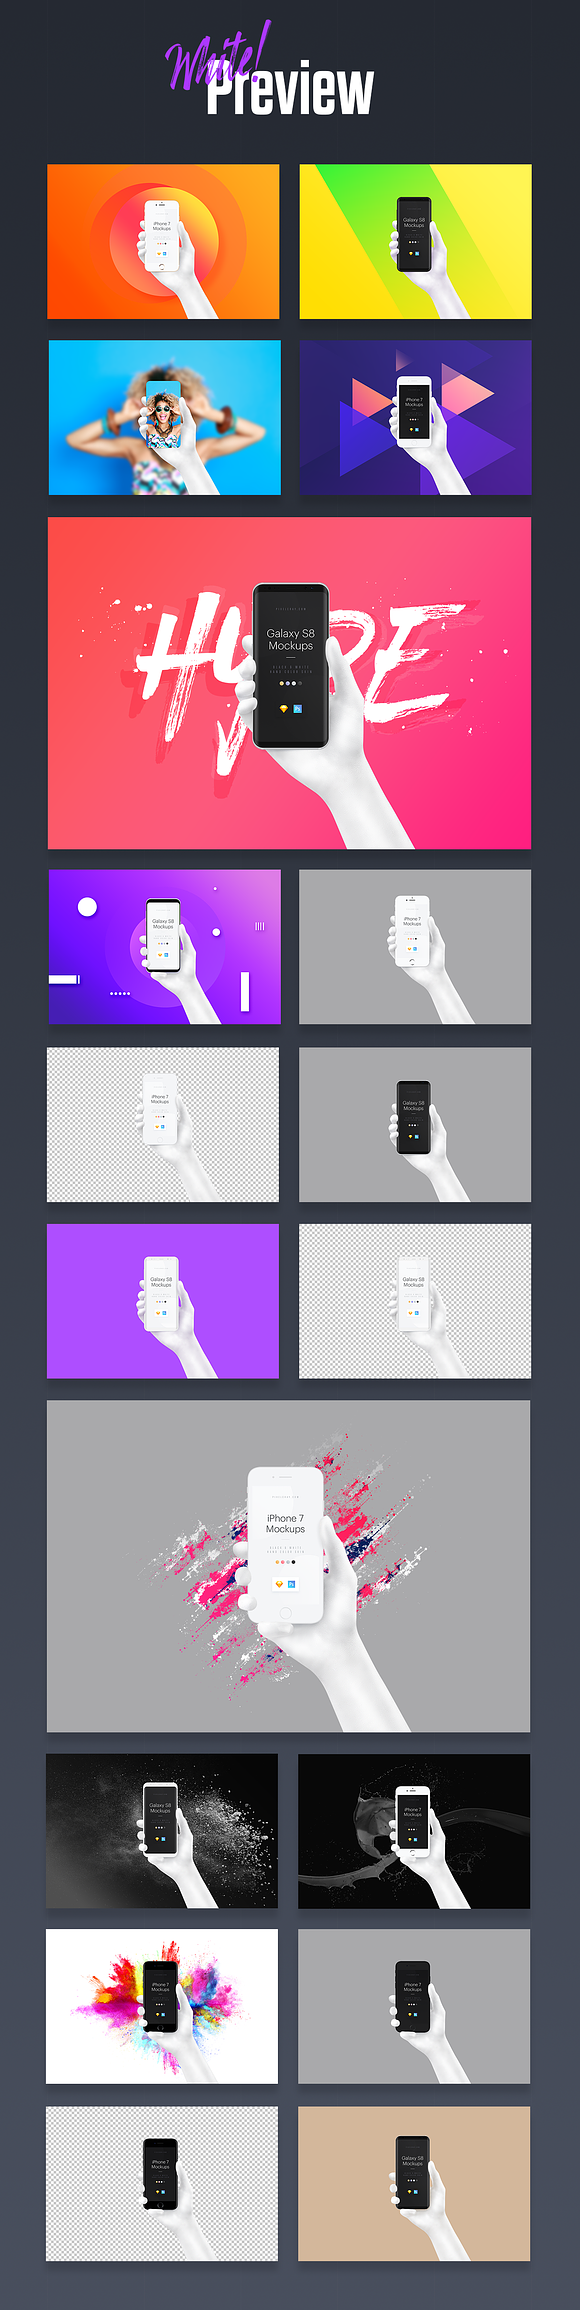 Black & White Mockup Hands in Mobile & Web Mockups - product preview 4